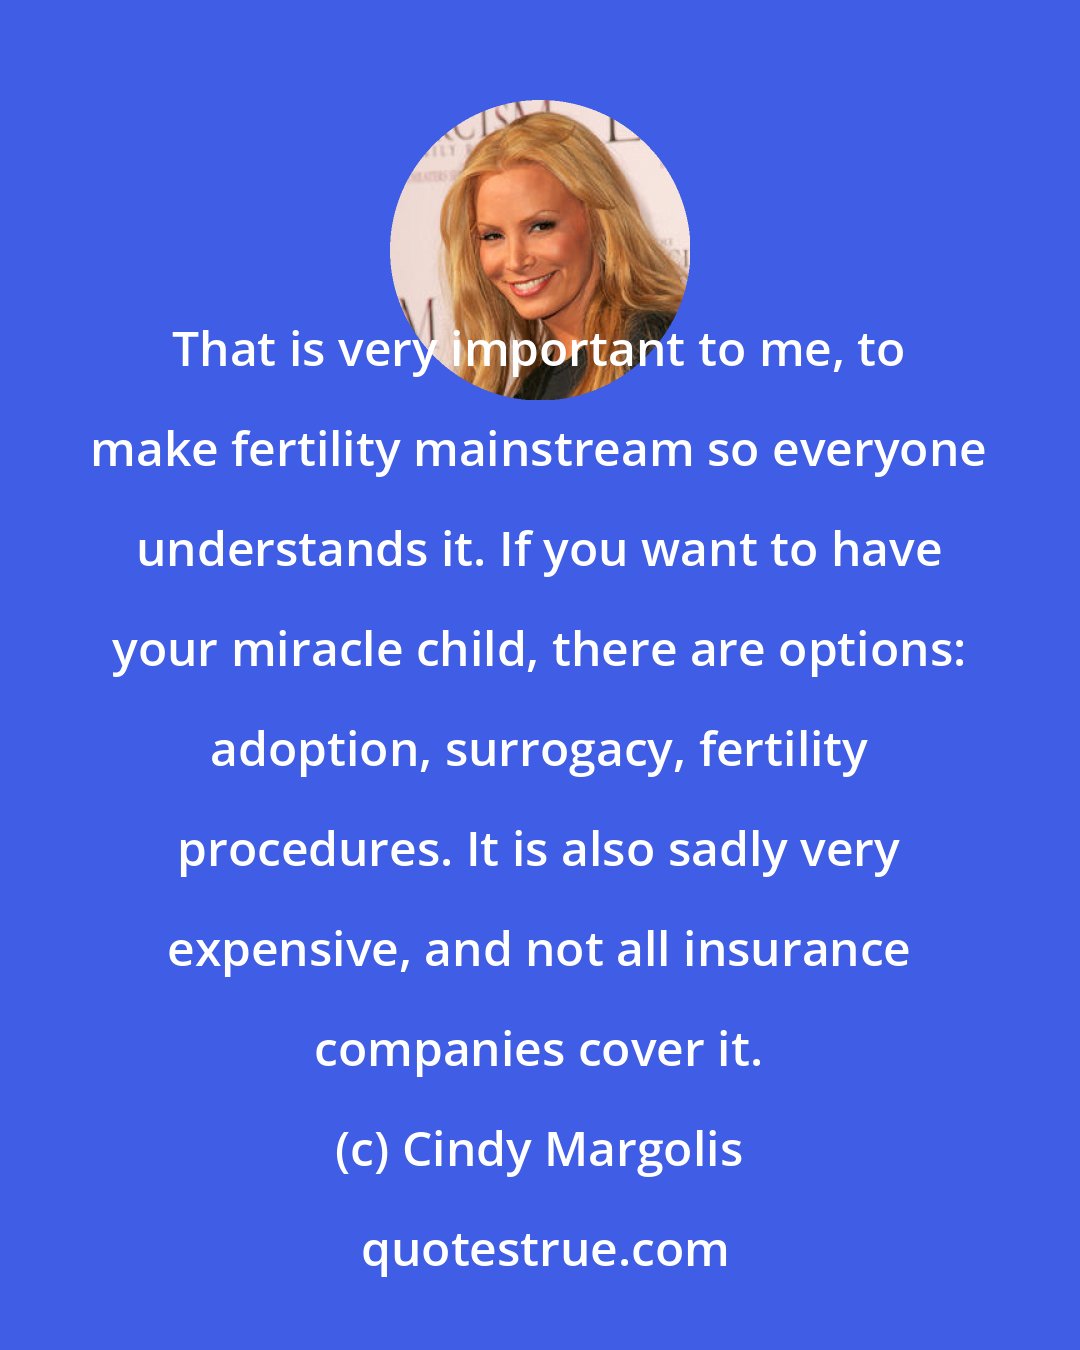 Cindy Margolis: That is very important to me, to make fertility mainstream so everyone understands it. If you want to have your miracle child, there are options: adoption, surrogacy, fertility procedures. It is also sadly very expensive, and not all insurance companies cover it.